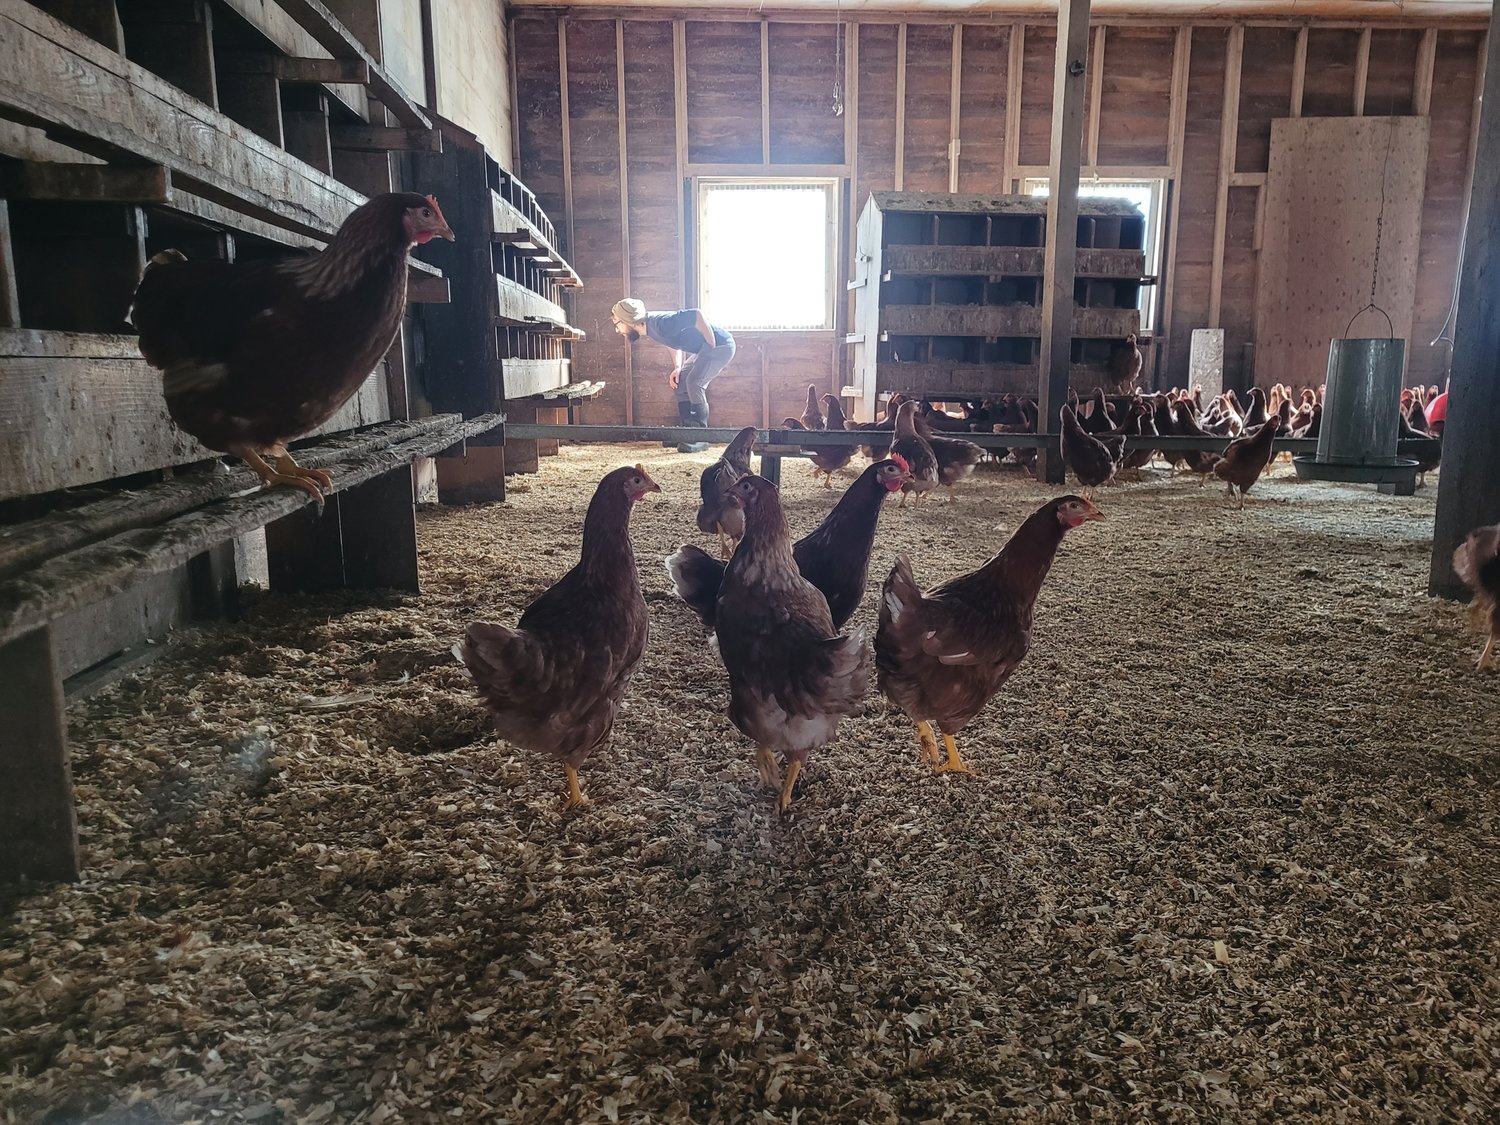 EGG-CEPTIONAL: Baffoni Poultry Farm in Johnston has several more than century-old two-story chicken houses. The farm has about 20,000 chickens. Of those, around 7-8,000 are egg-laying hens, according to owner Adam Baffoni. The chickens lay approximately 3-4,000 eggs per day.